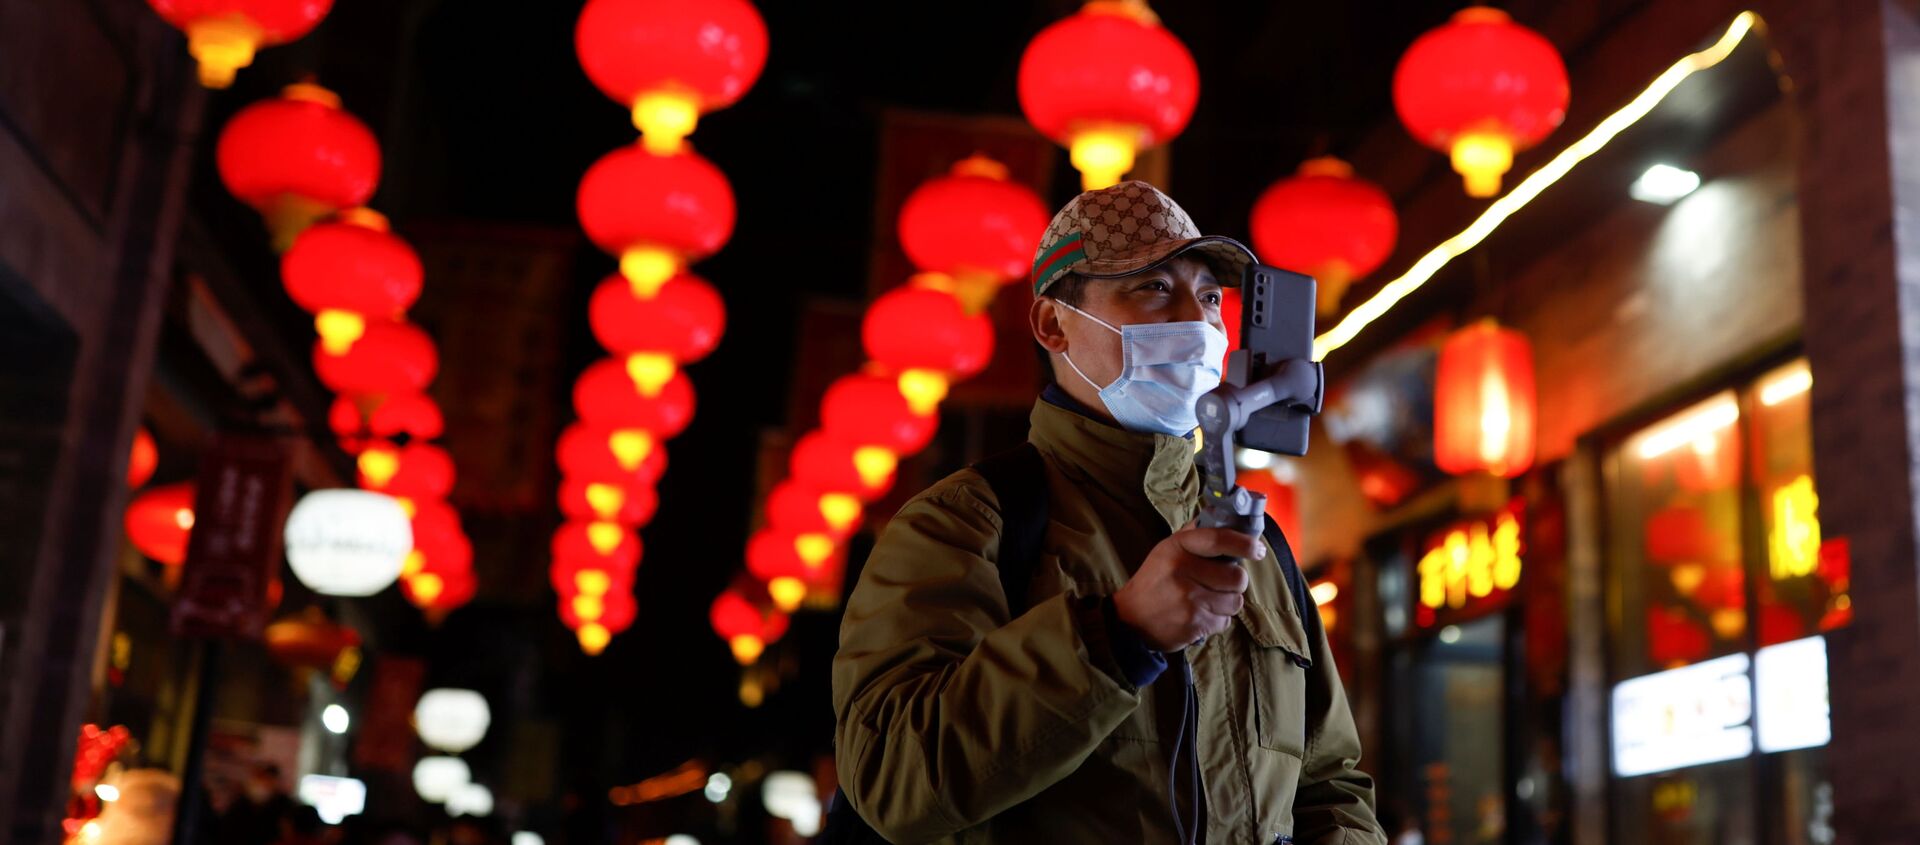 A man wearing a face mask following an outbreak of the coronavirus disease (COVID-19) uses his phone while walking near the Qianmen street ahead of Lunar New Year celebrations, in Beijing, China February 10, 2021 - Sputnik International, 1920, 02.03.2021